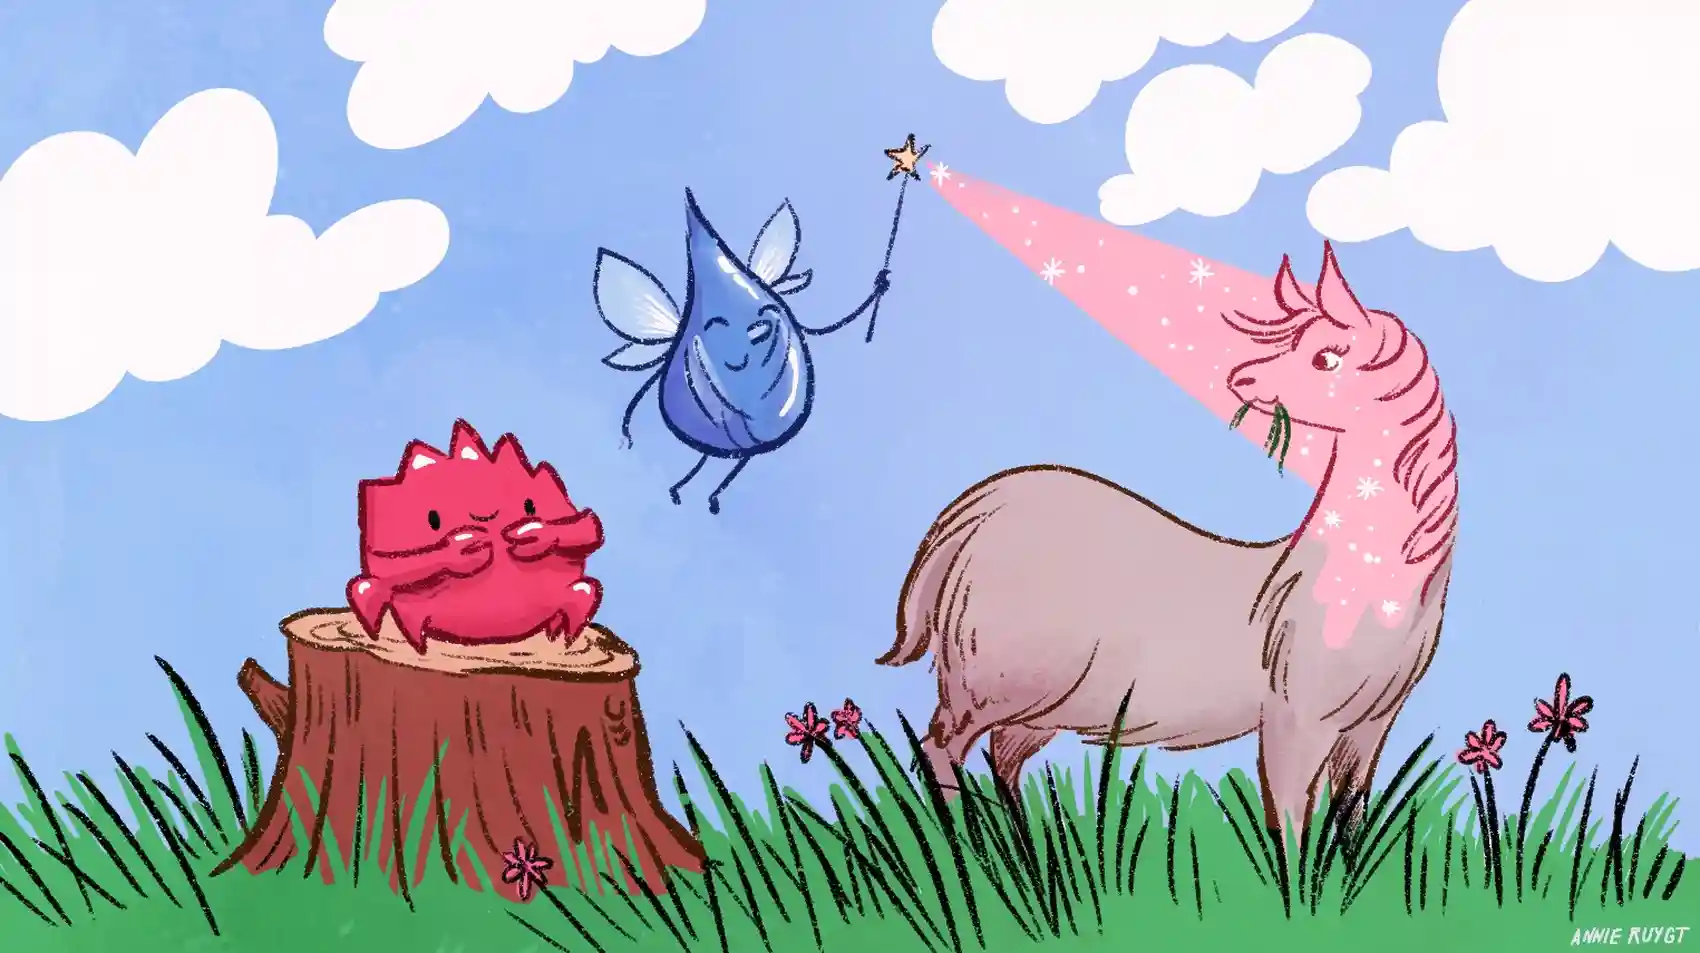 Illustration of elixir droplet, rust crab and a LLama with the elixir droplet holding a magic wand up to the Llama.